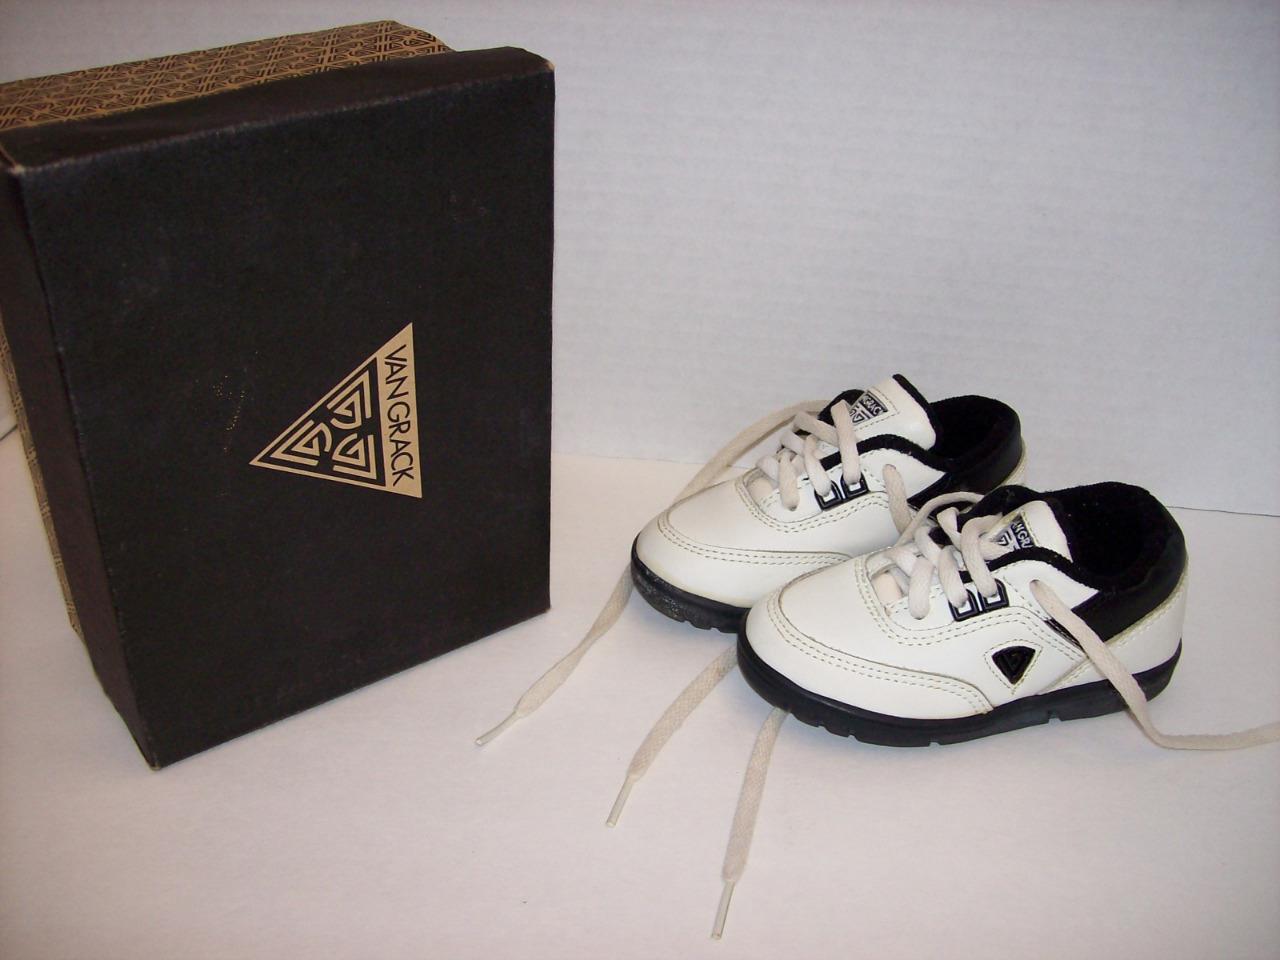 Vintage Van Grack New Old Stock 90's Size 6 Kids UniSex Shoes Black and White - Picture 1 of 1